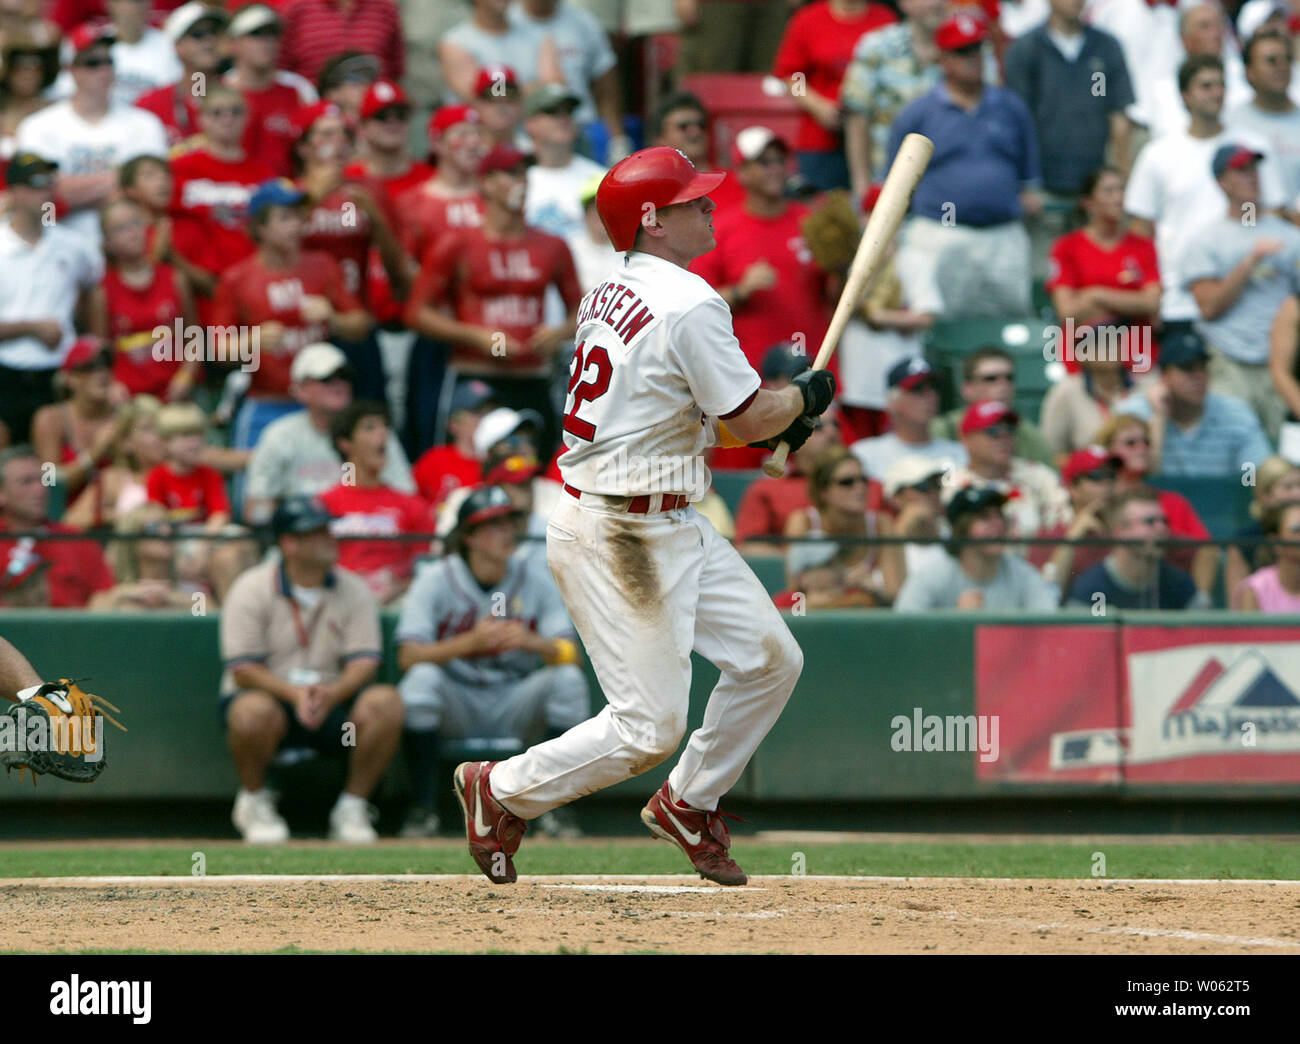 St. Louis Cardinals David Eckstein watches as the baseball leaves the park  for a grandslam homerun the ninth inning against the Atlanta Braves in St.  Louis on August 7, 2005. Next year,